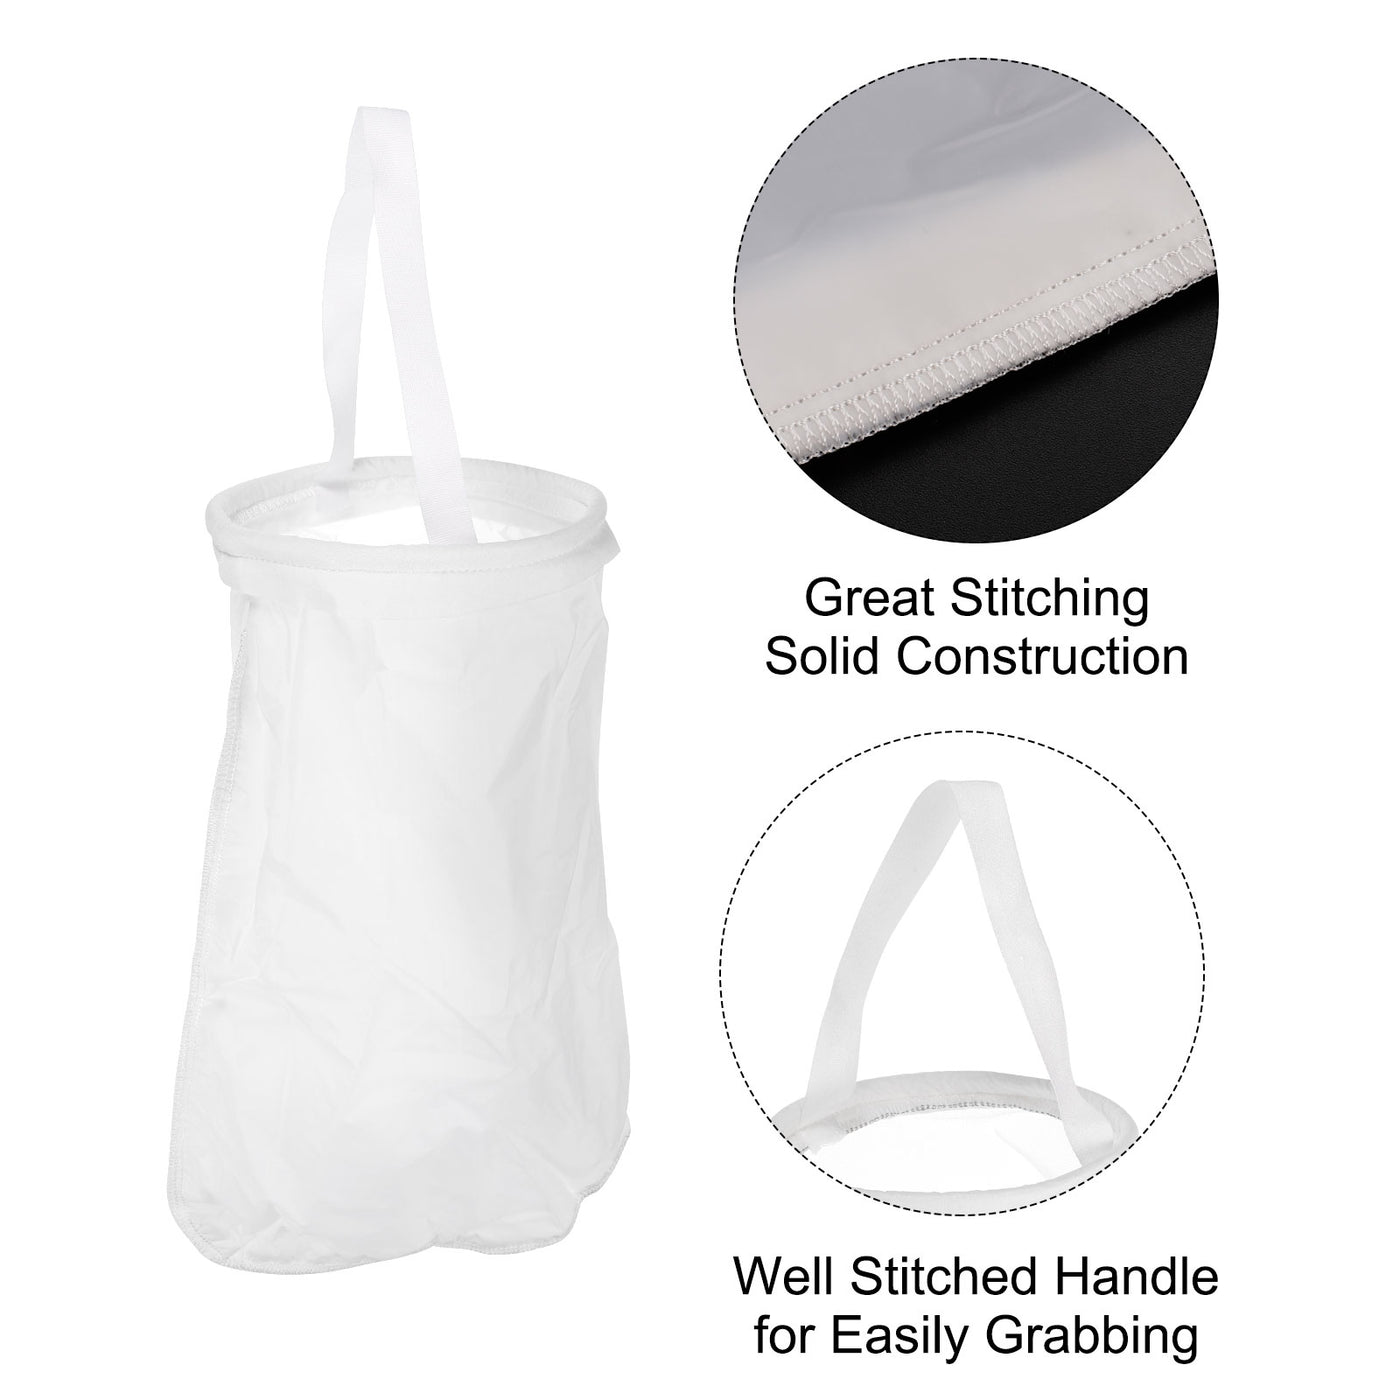 uxcell Uxcell Paint Filter Bag 450 Mesh (16.9"x7") Nylon Strainer for Filtering Paint